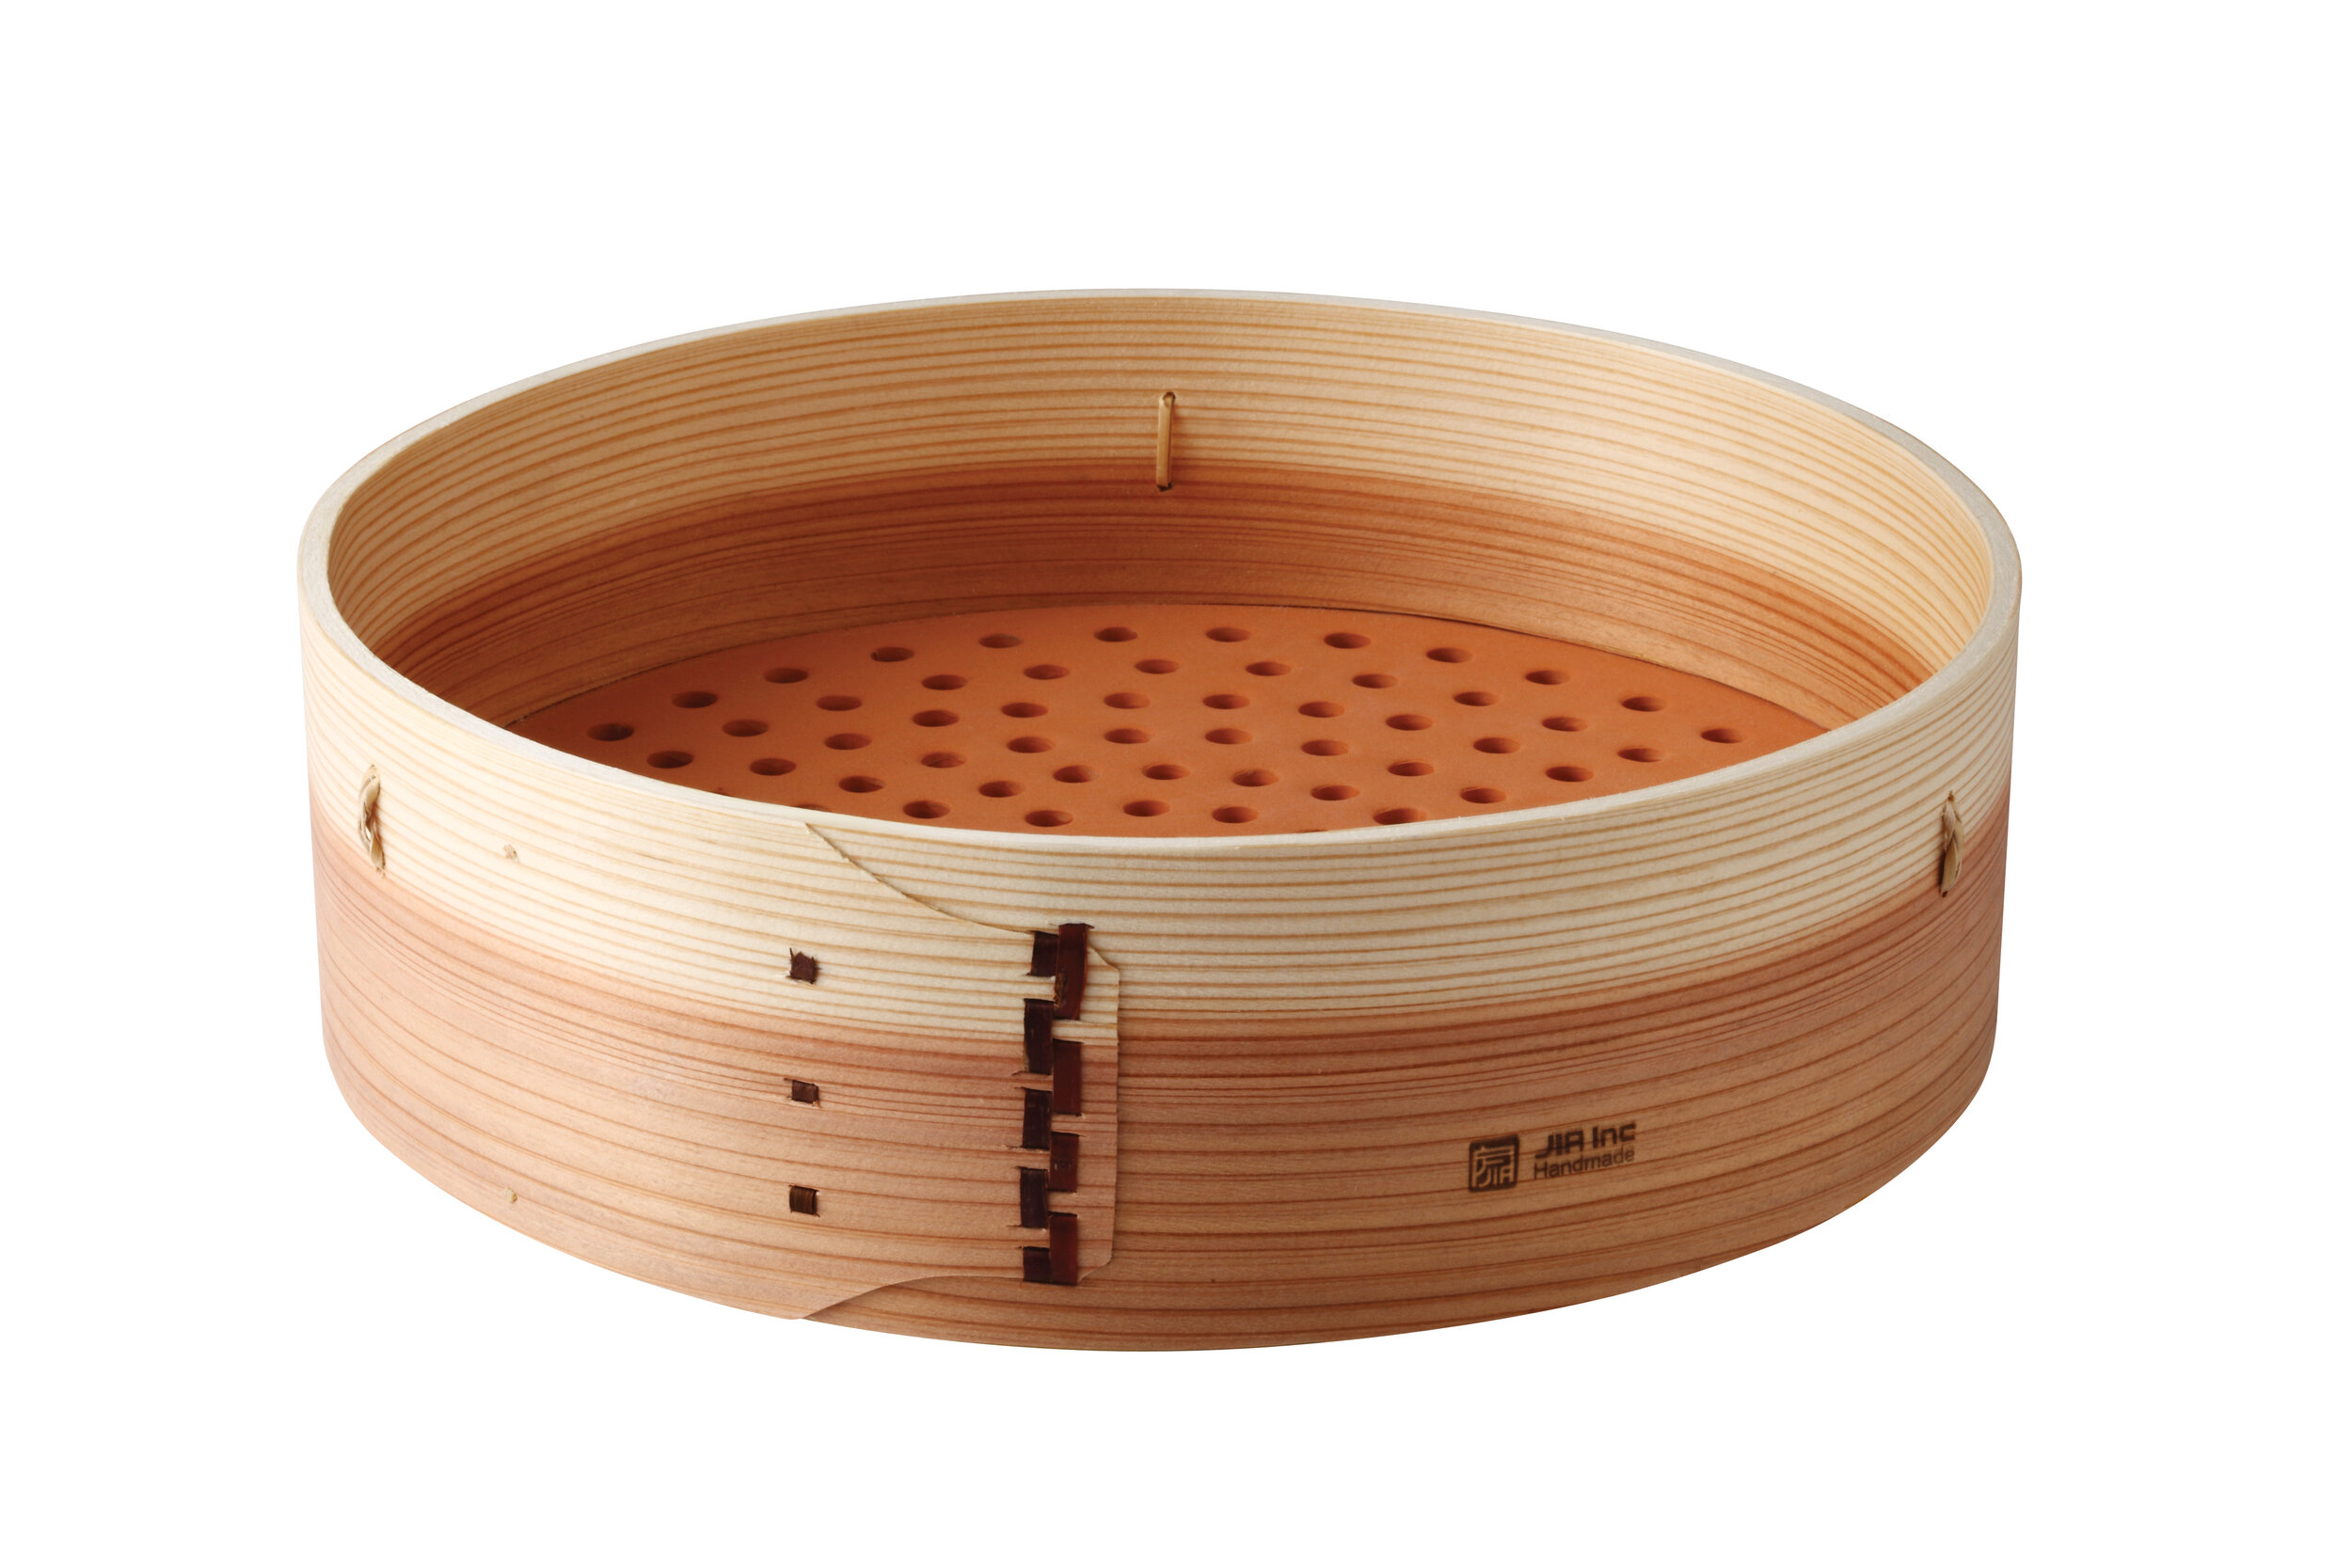 Cedar Wood Extended Height 24cm Large Steam Basket Small JIA Inc